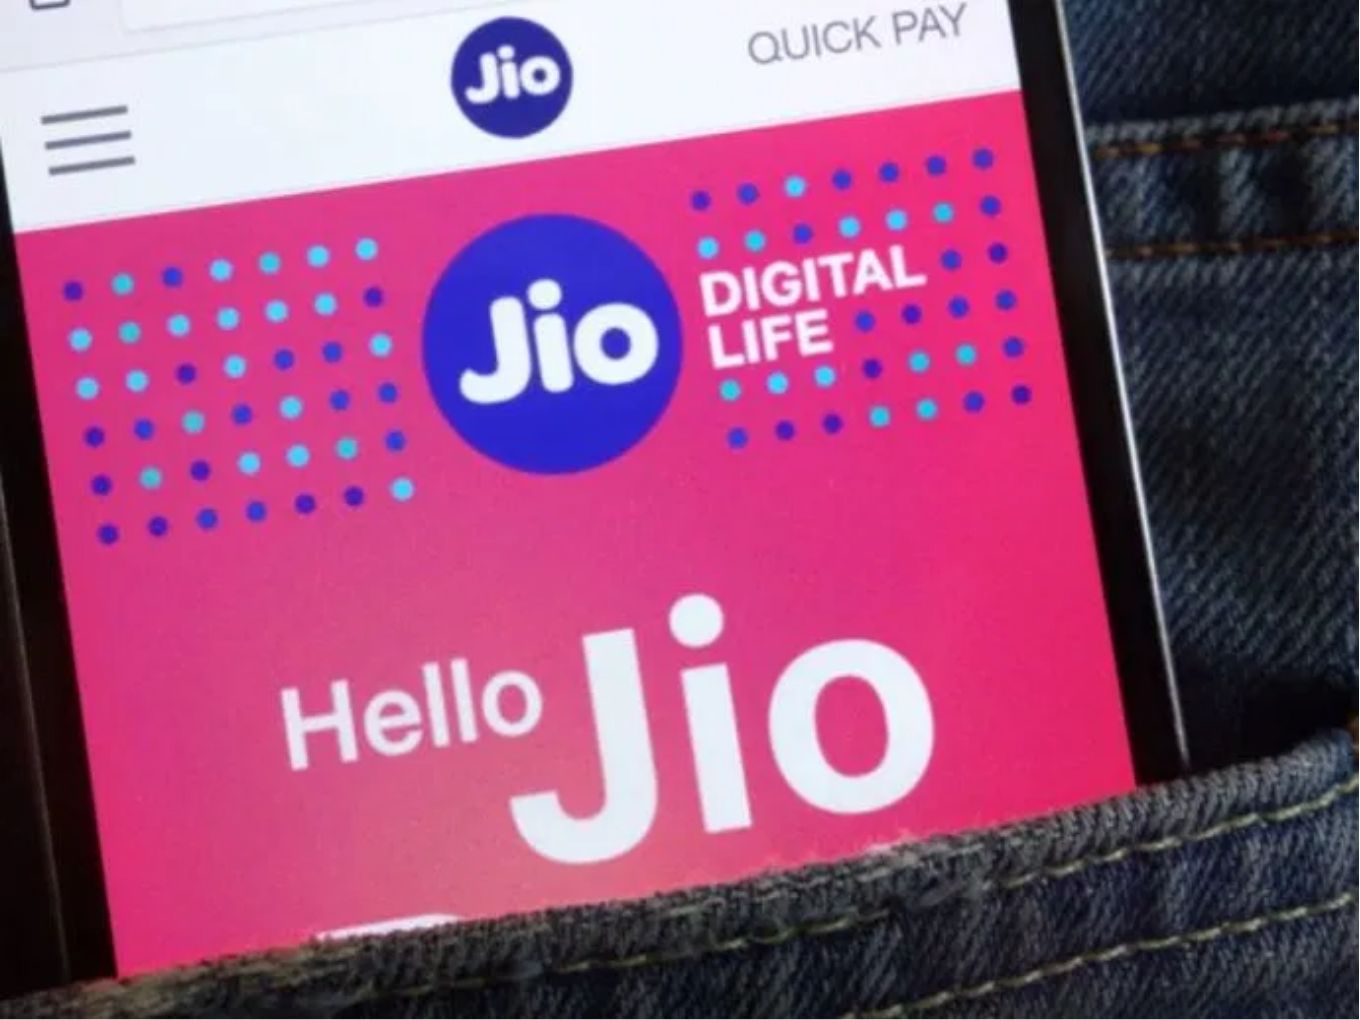 After Stakes Sale in Jio, Reliance Plows INR 35K Cr In Debt Mutual Funds